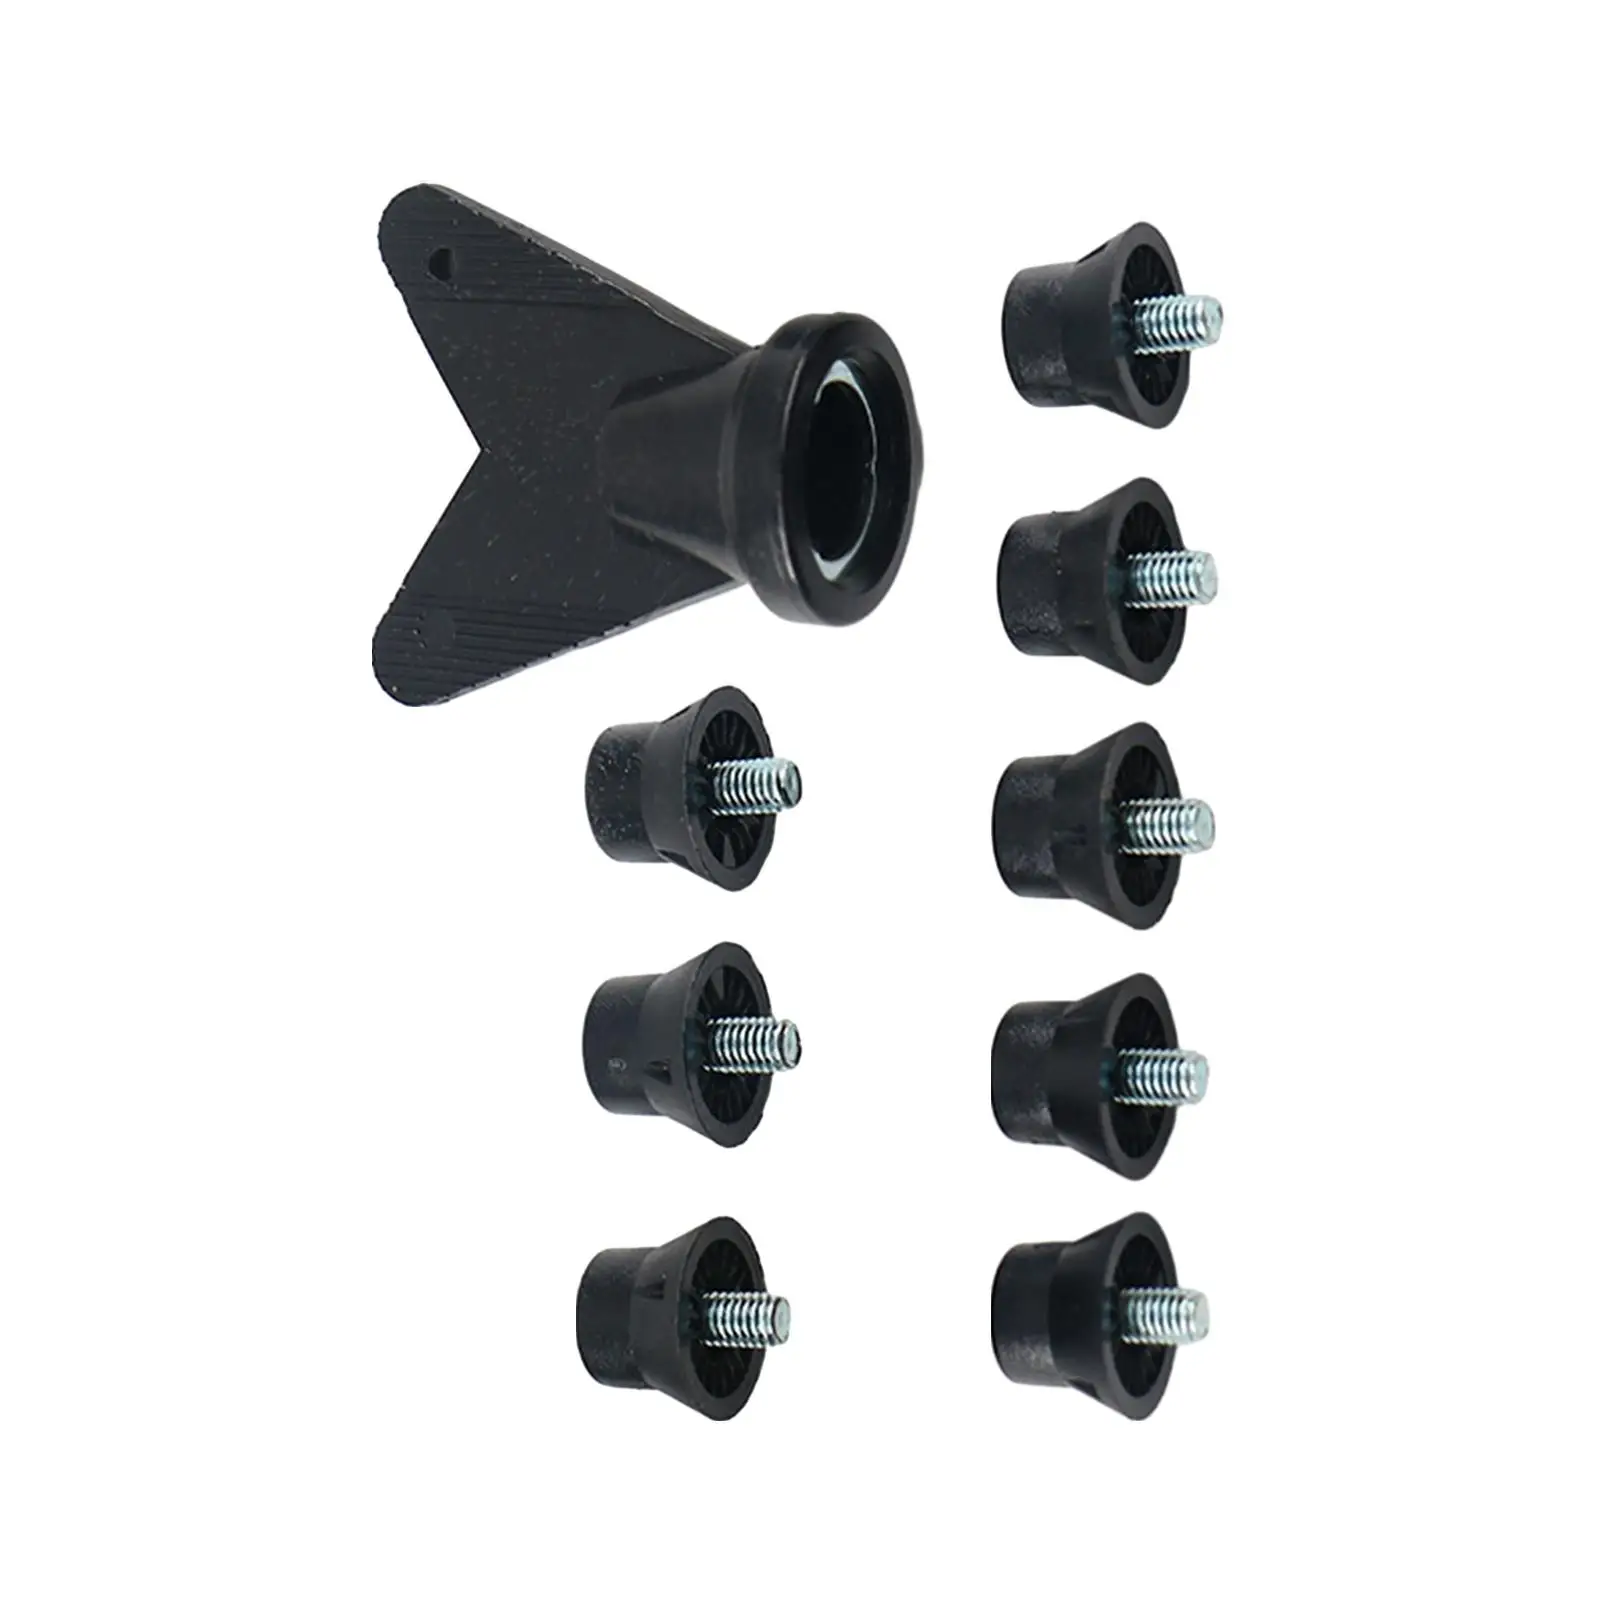 12Pcs Rugby Studs Portable Non Slip M5 Threaded Soccer Studs for Competition Indoor Outdoor Sports Athletic Sneakers Training